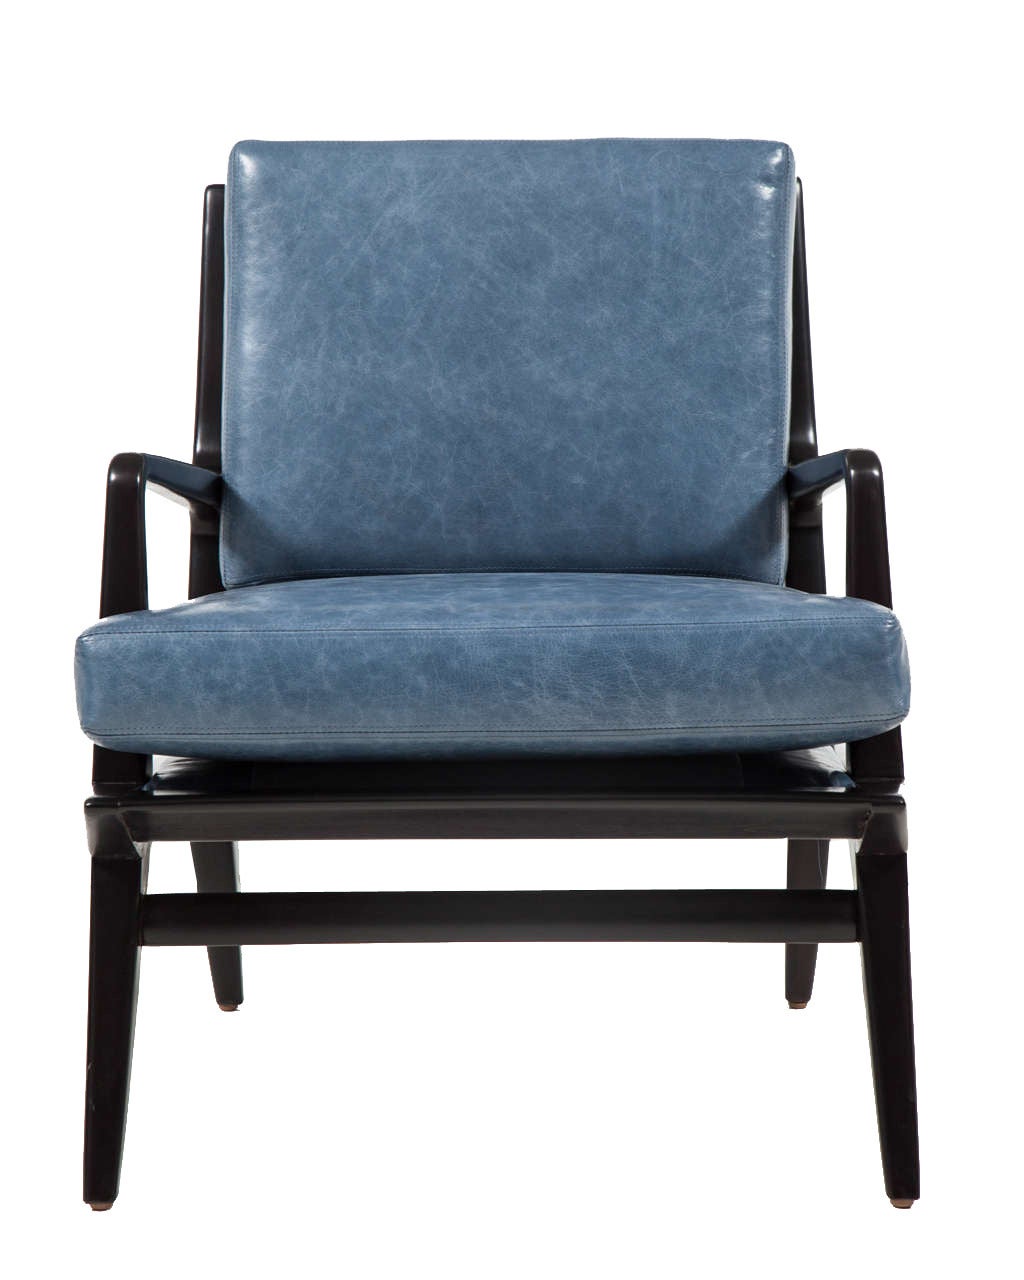 Landry open frame club chair in black lacquered frame with leather upholstery.
Measures:
Seat height-17” ,
seat depth -22”,
COM requirements: 4 yards.
5% up-charge for contrasting fabrics and or welting .
COL Requirements: 80 sq. feet .
5%